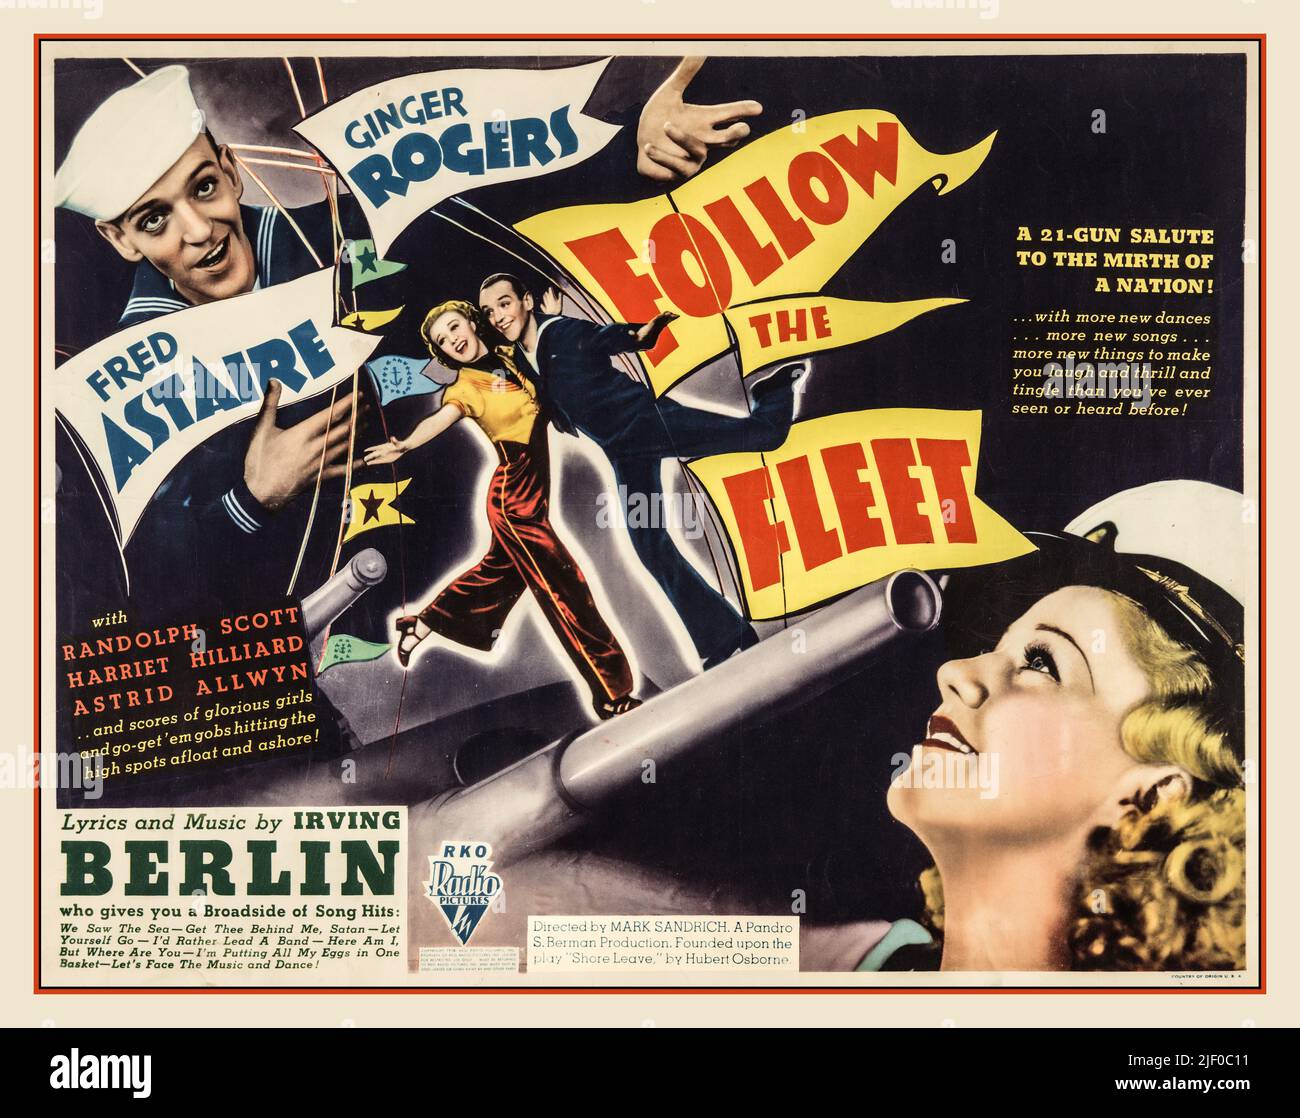 Vintage Movie Poster 'Follow the Fleet' starring Ginger Rogers & Fred Astaire 1936   A 21-gun salute to the mirth of a nation! with Randolph Scott, Harriet Hilliard, Astrid Allwyn. Music and Lyrics by Irving Berlin RKO Radio Picture Stock Photo